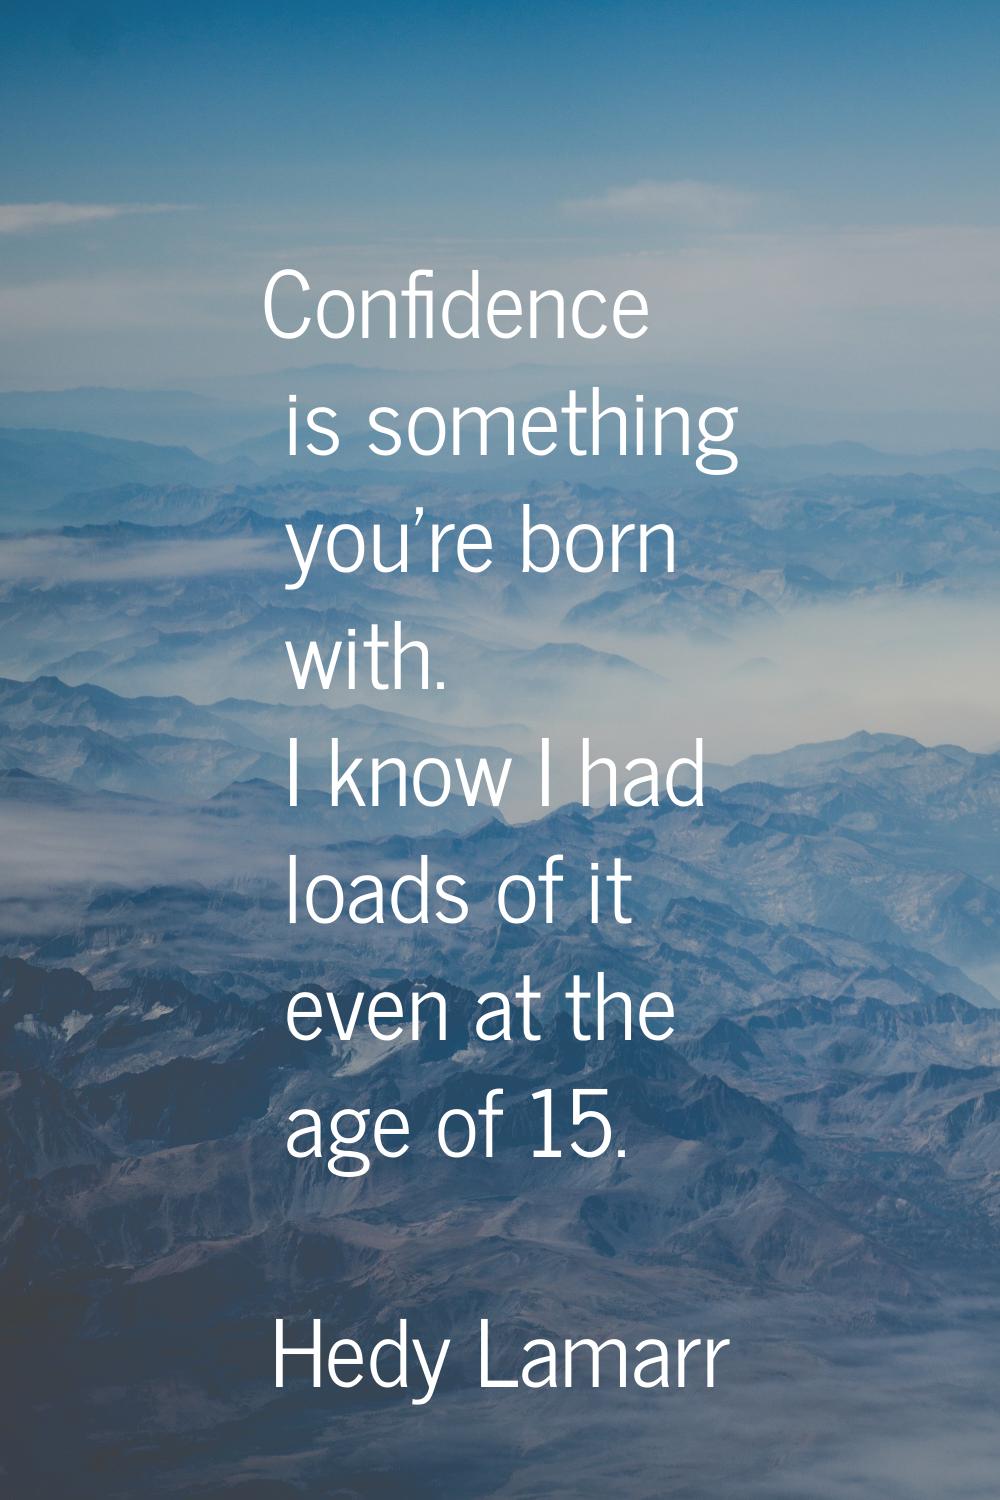 Confidence is something you're born with. I know I had loads of it even at the age of 15.